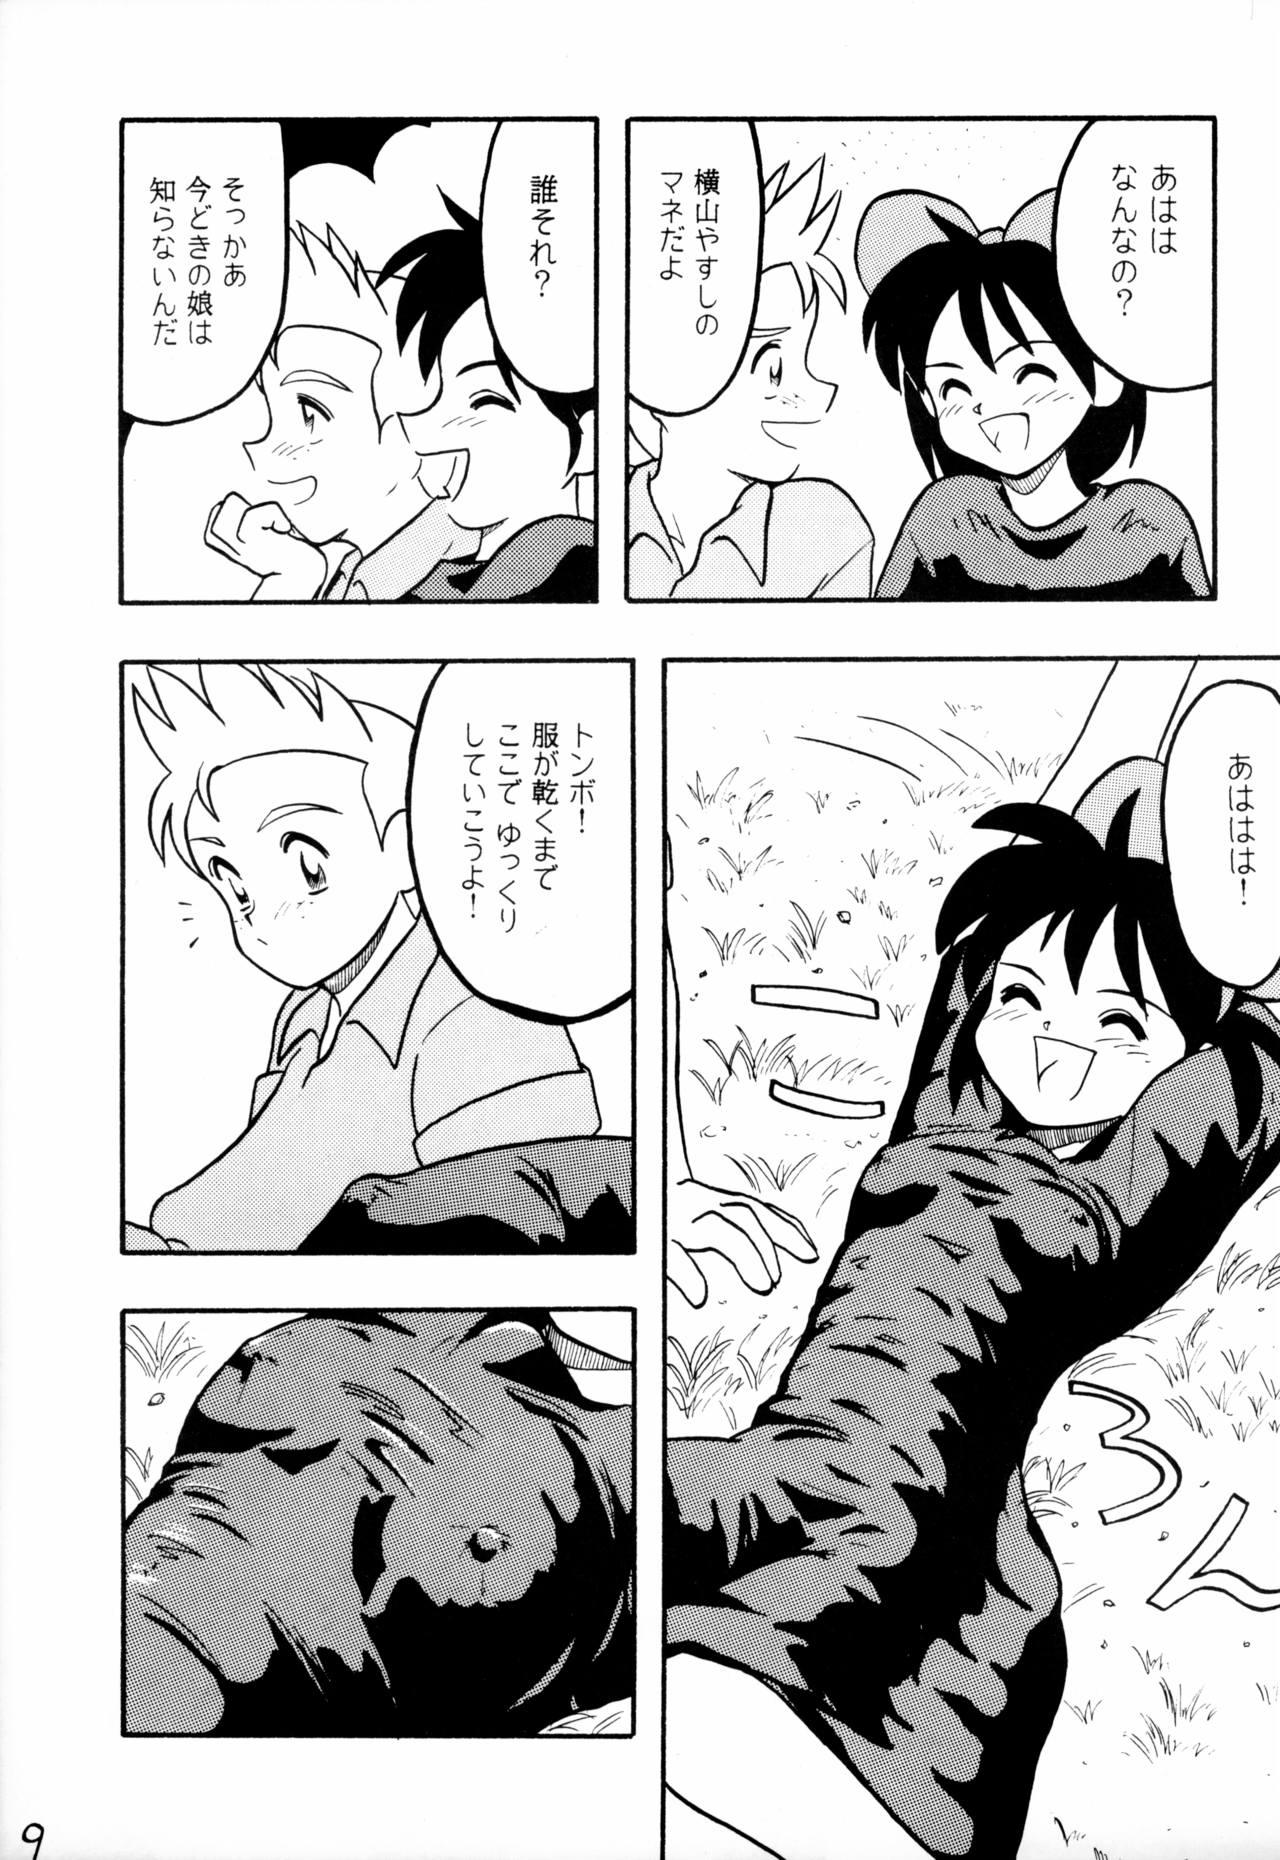 Awesome STRANDED - Kikis delivery service | majo no takkyuubin Stretching - Page 9